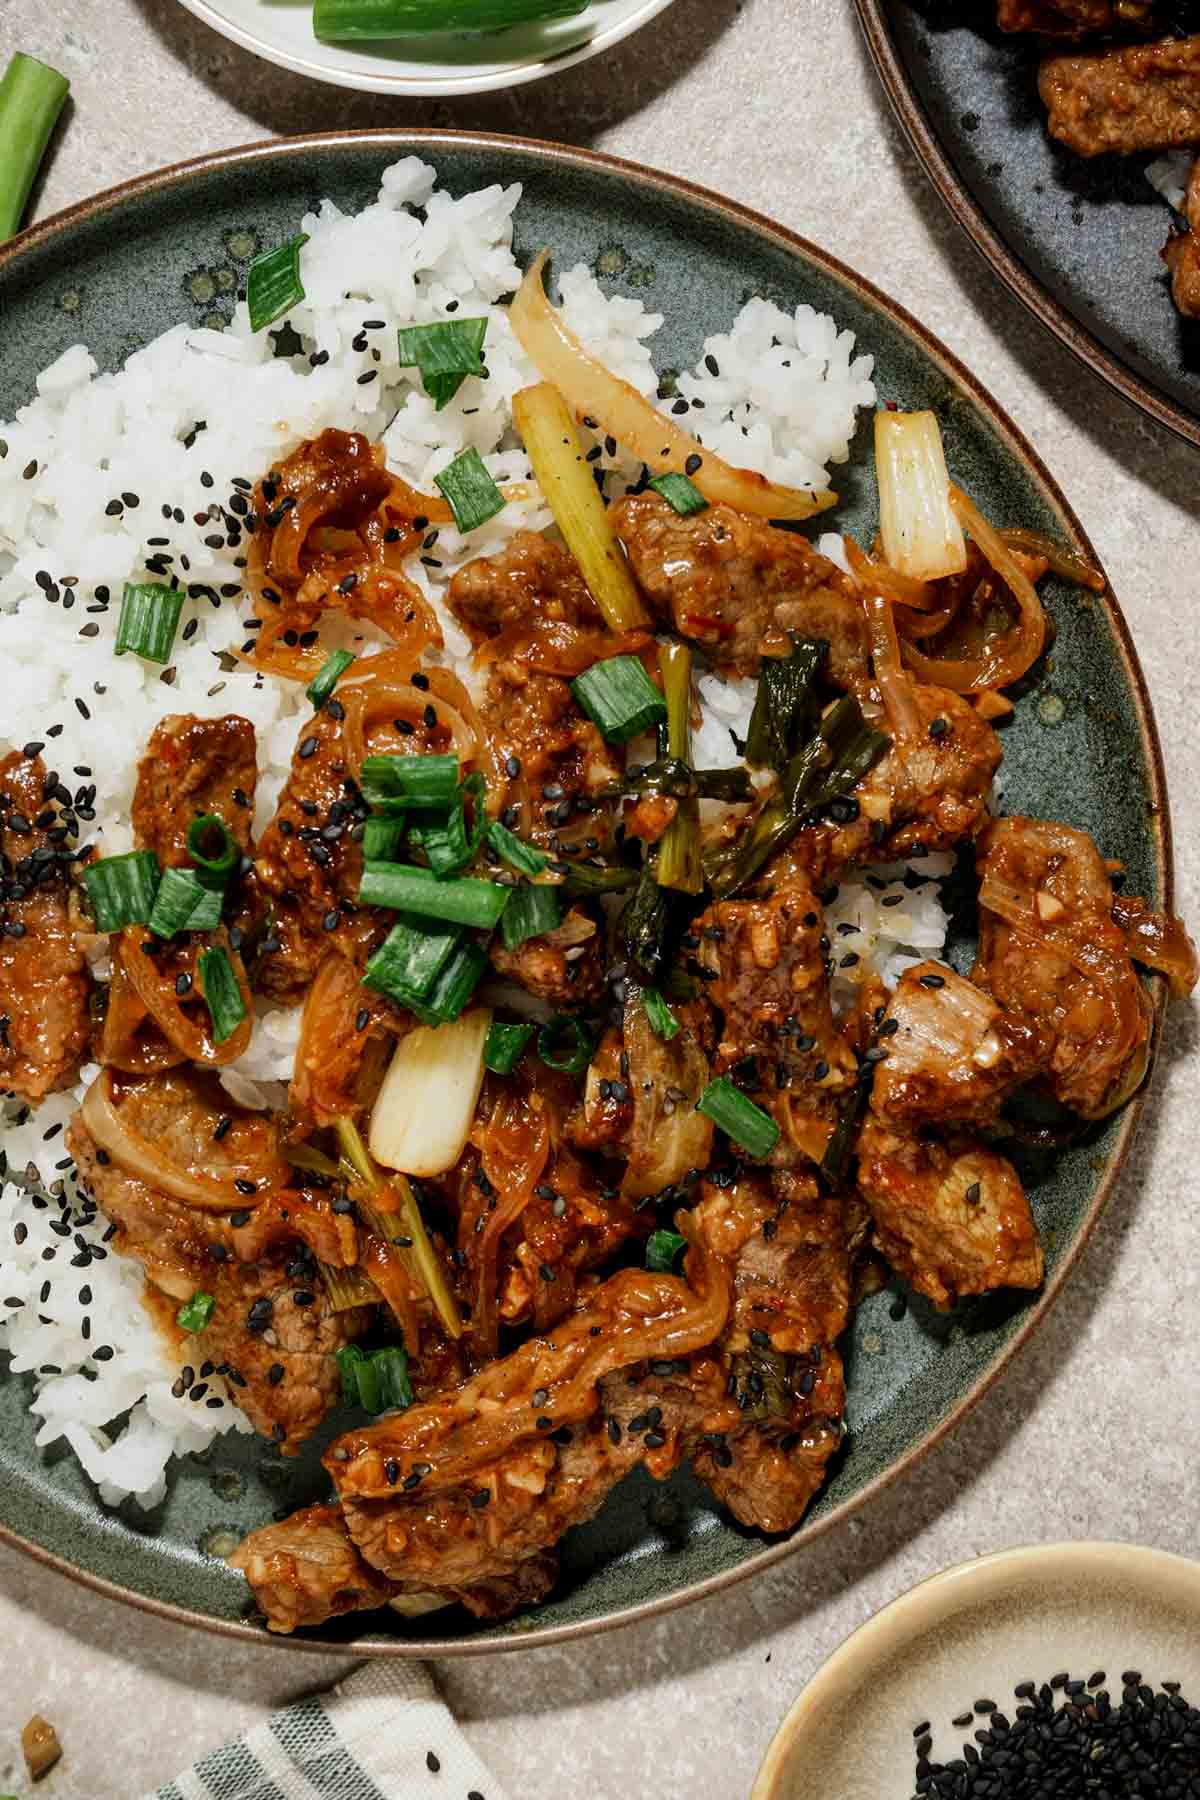 cooked lamb pieces with green onions over white rice